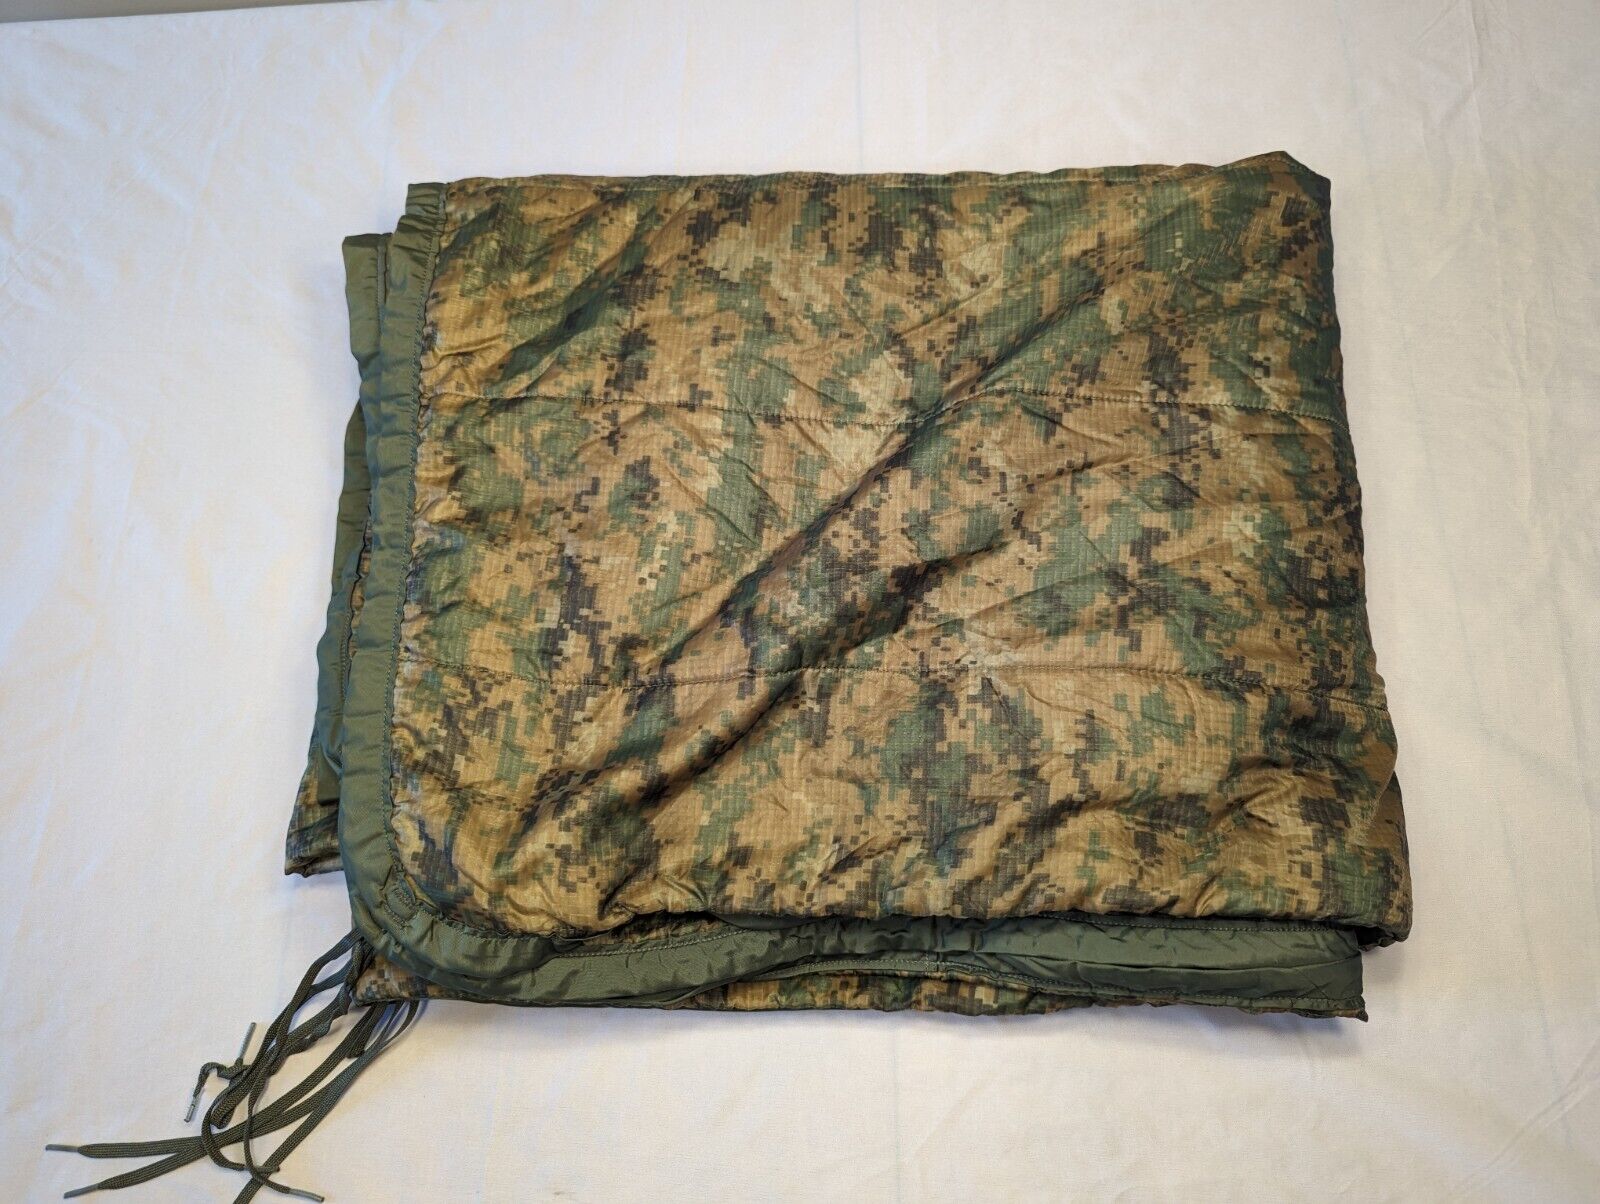 Poncho Liner with Zipper Wet Weather Woobie USMC Issue Marpat - Used Good